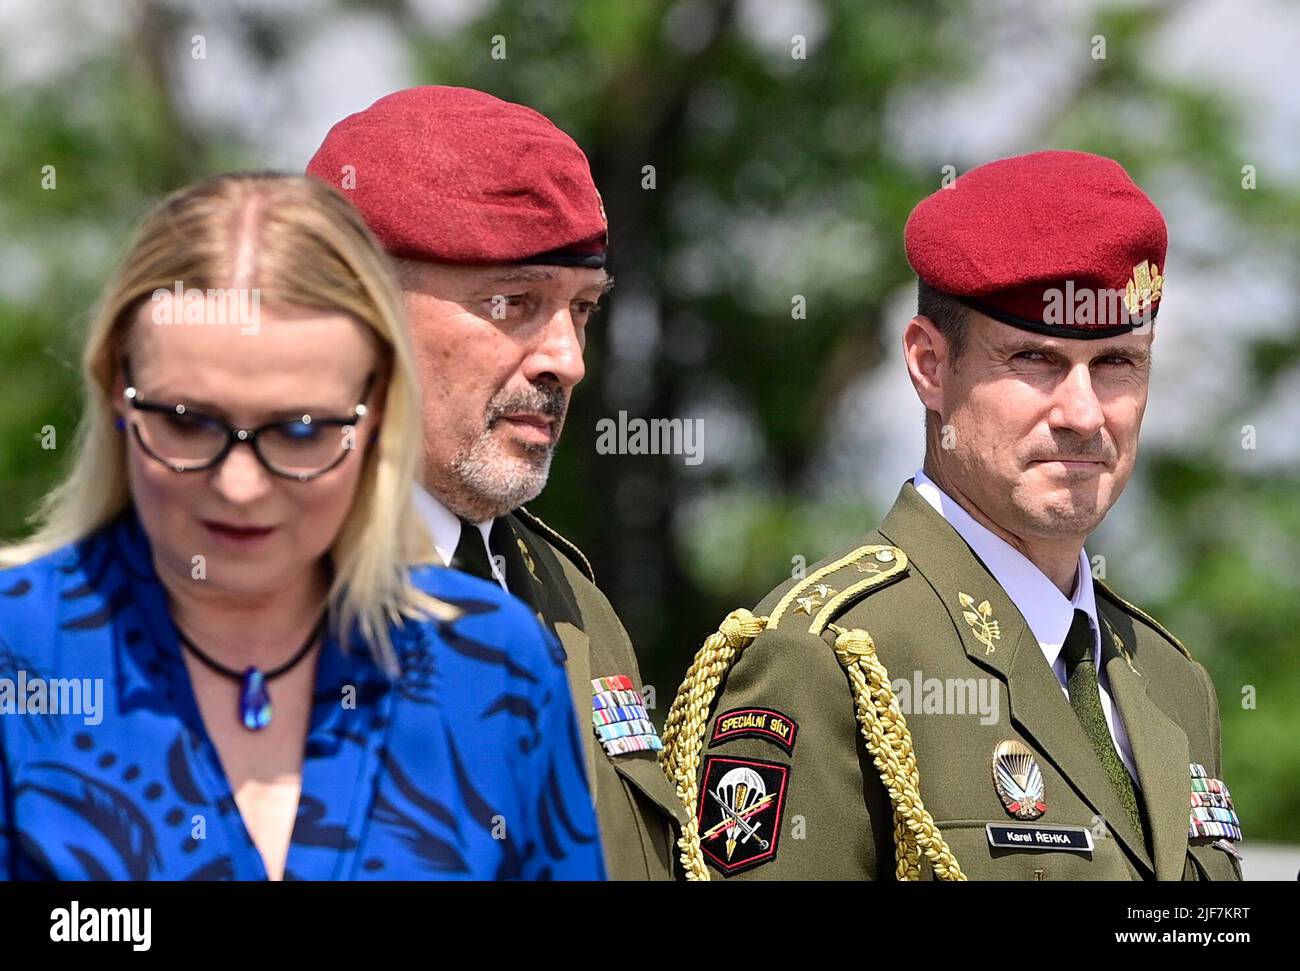 Prague, Czech Republic. 30th June, 2022. On the occasion of Armed Forces Day the Chief of Staff Ales Opata passes the post to Brigadier General Karel Rehka (right) at Vitkov National Memorial, Prague, Czech Republic, on June 30, 2022. On the left is Defence Minister Jana Cernochova. Credit: Roman Vondrous/CTK Photo/Alamy Live News Stock Photo